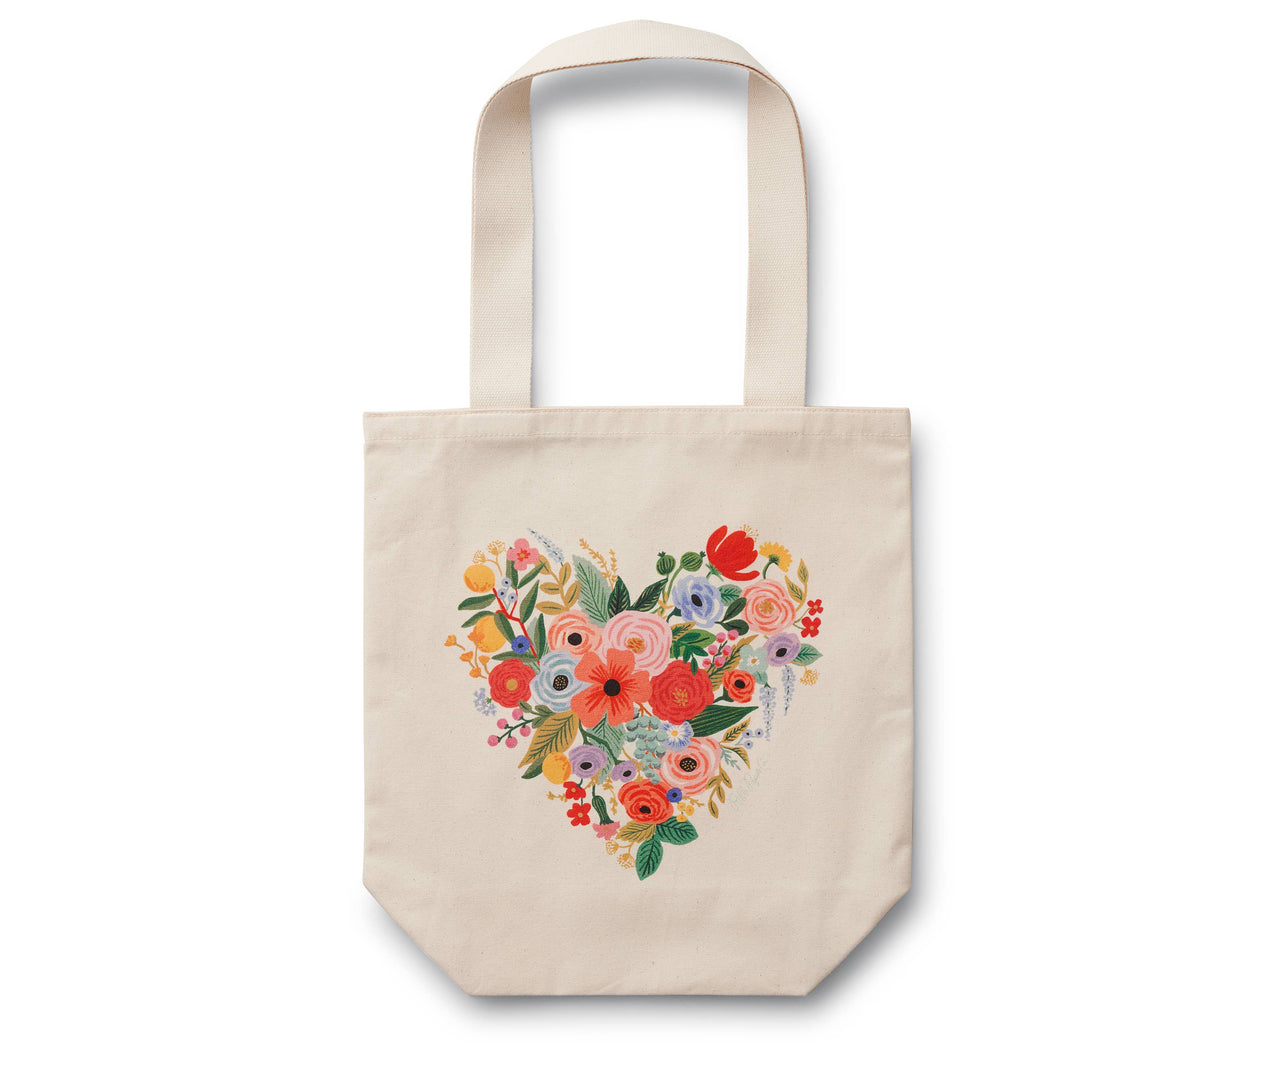 Floral Heart Canvas Tote Bag